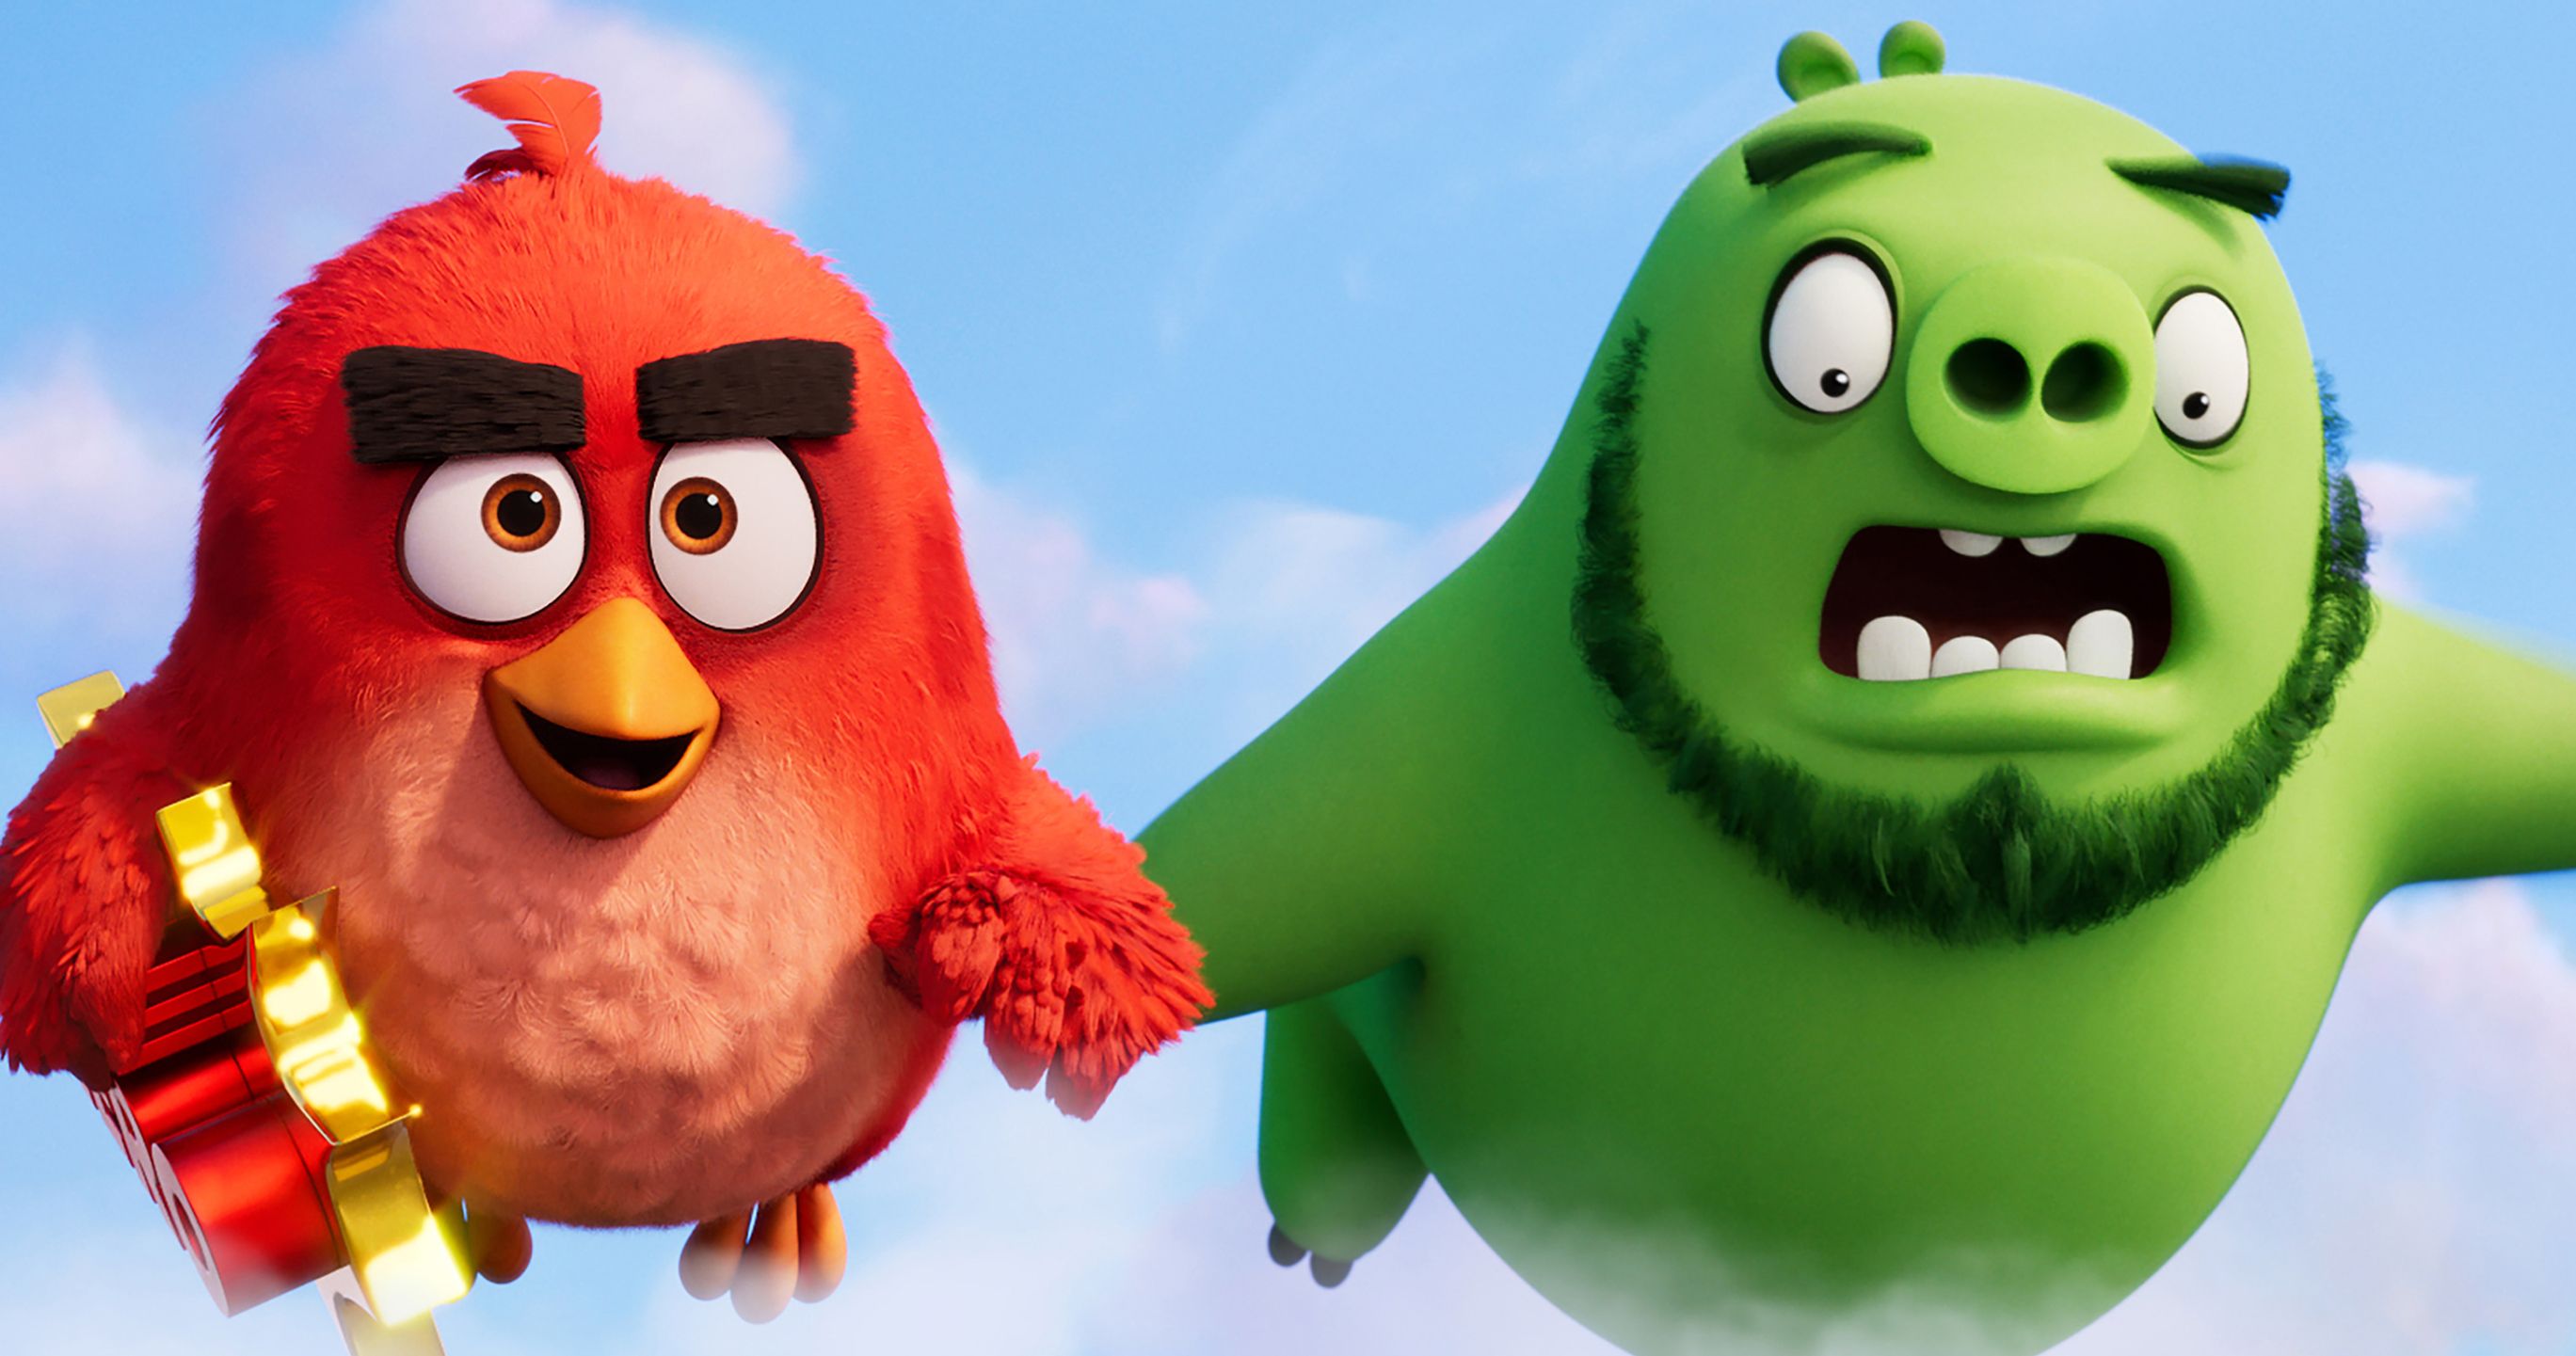 The Angry Birds Movie 2 Final Trailer Has Birds and Pigs Uniting to Save the World